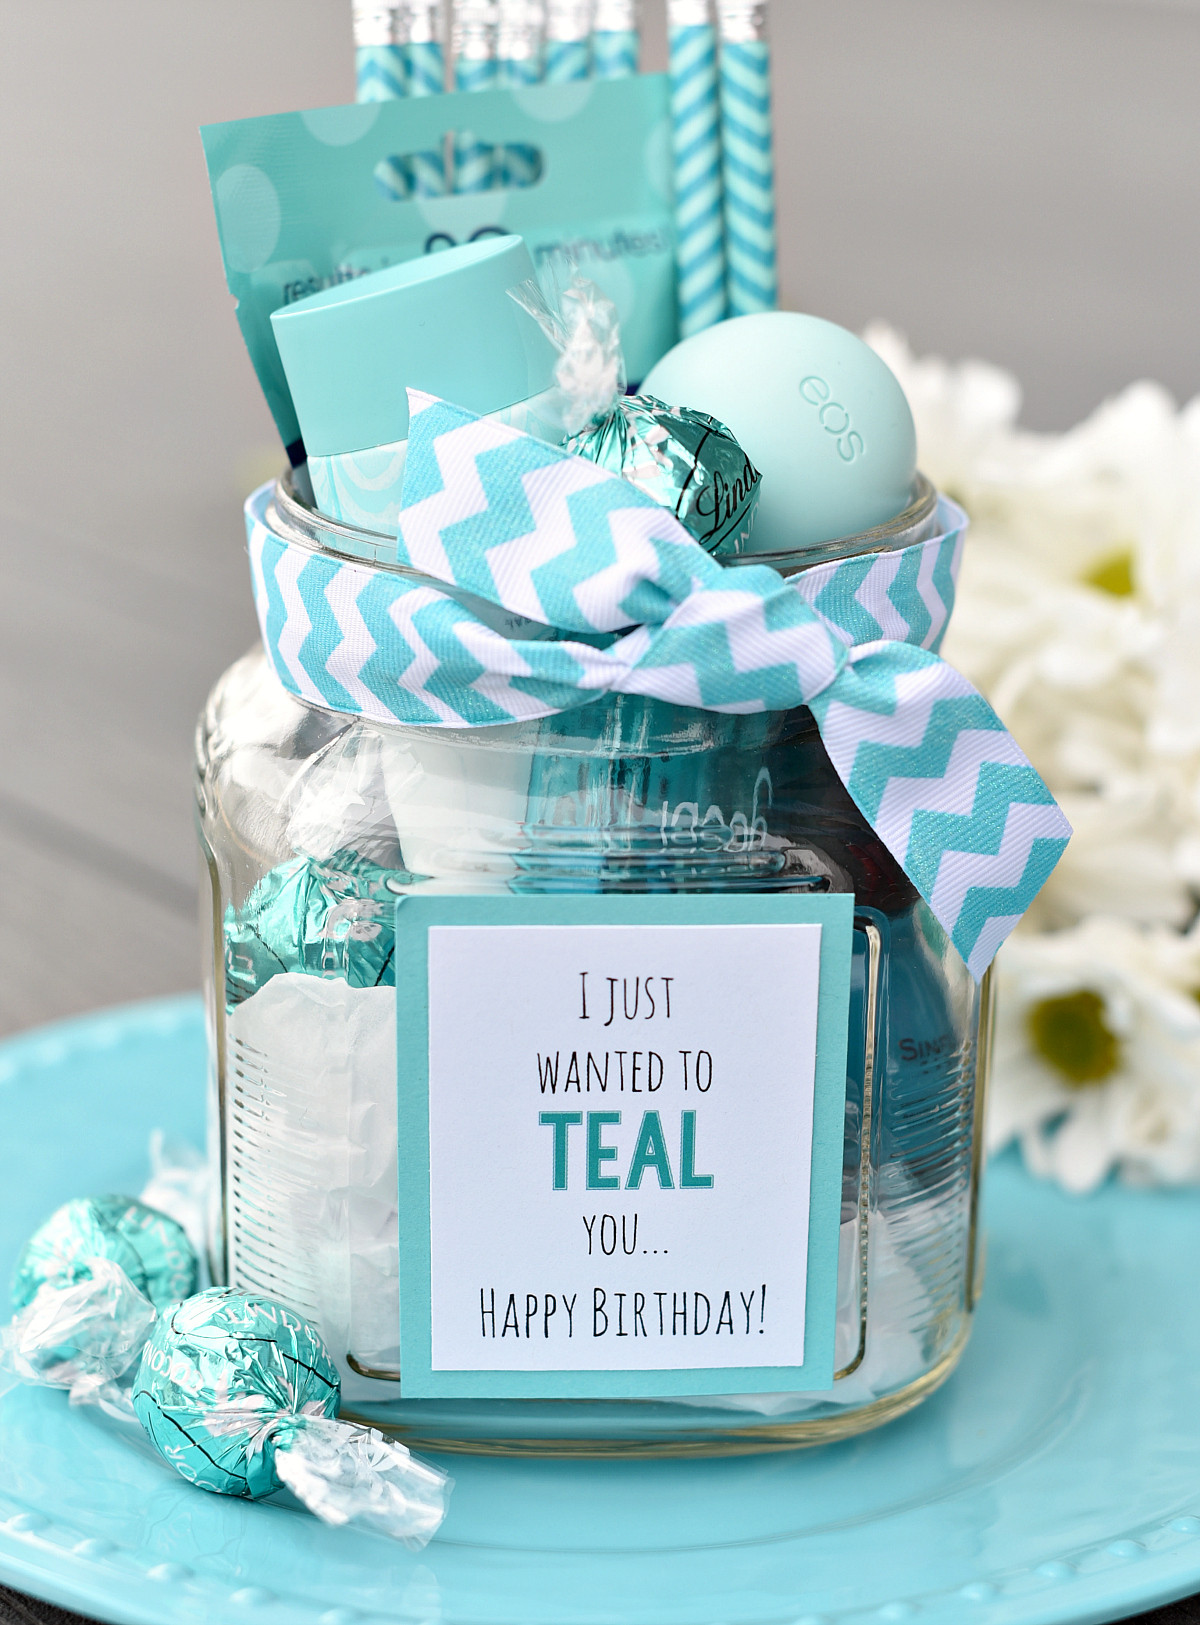 DIY Best Friend Birthday Gifts
 Teal Birthday Gift Idea for Friends – Fun Squared